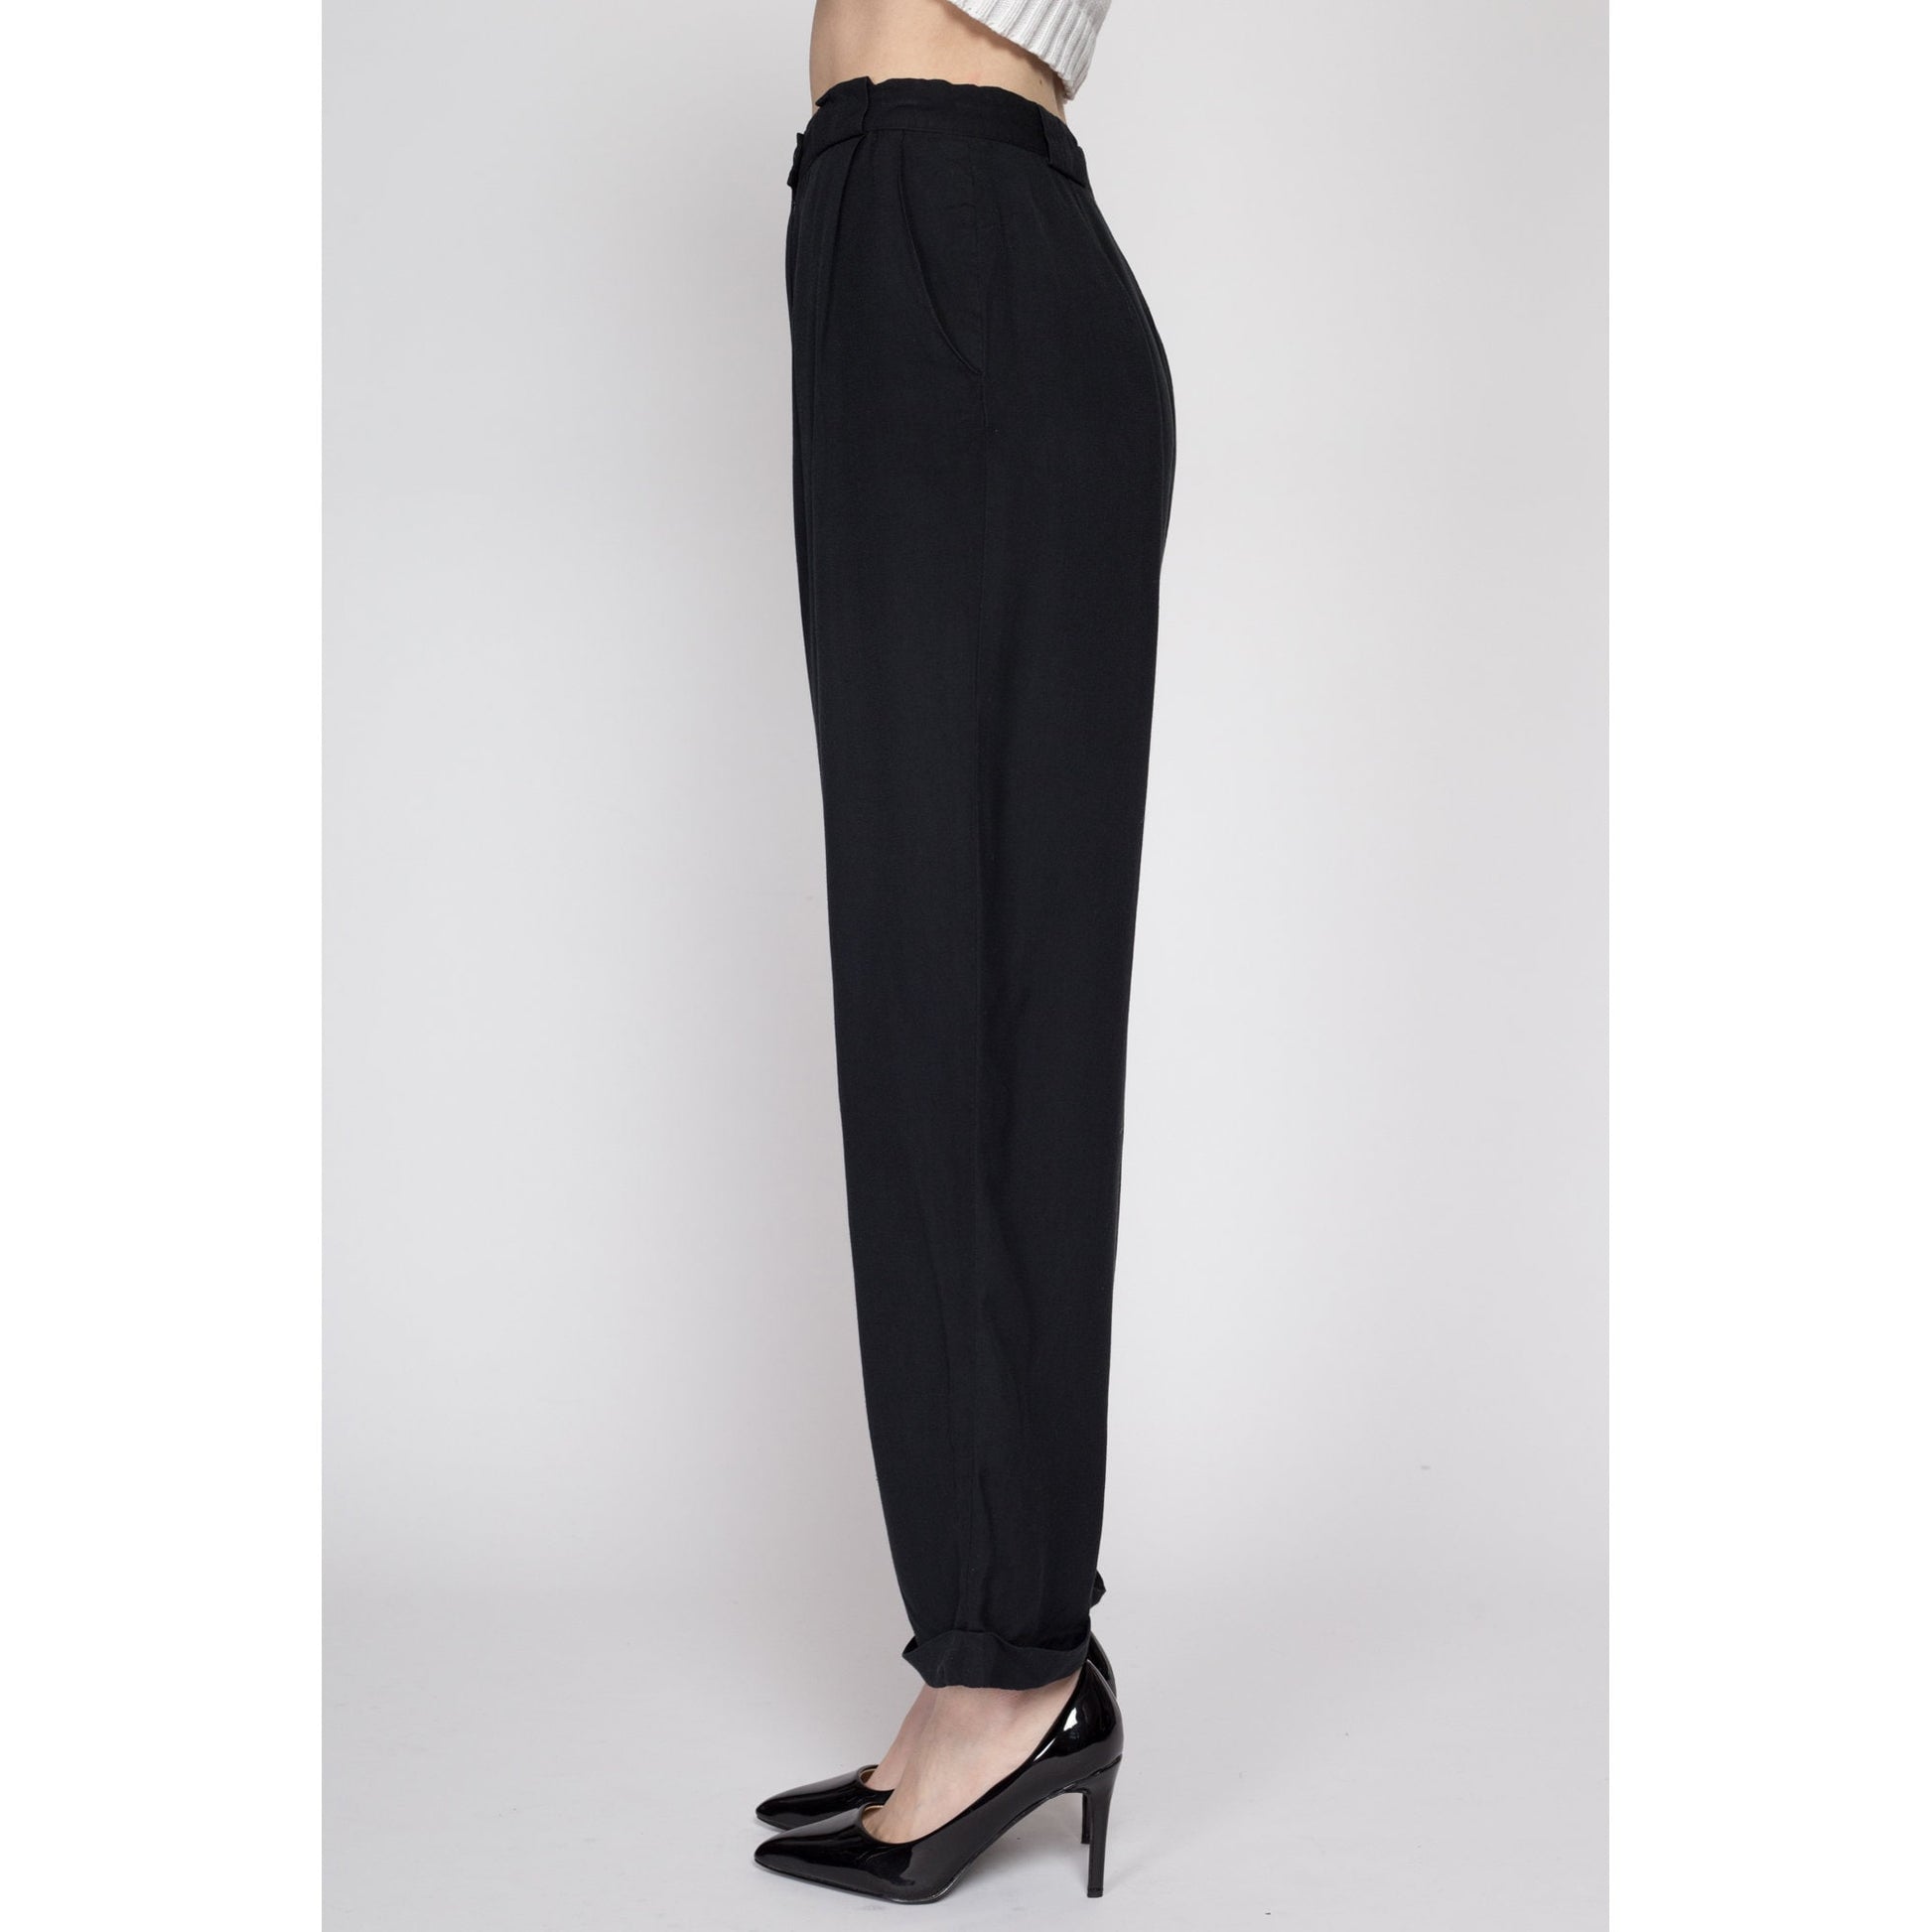 XS 80s Black High Waisted Pleated Trousers 24.5